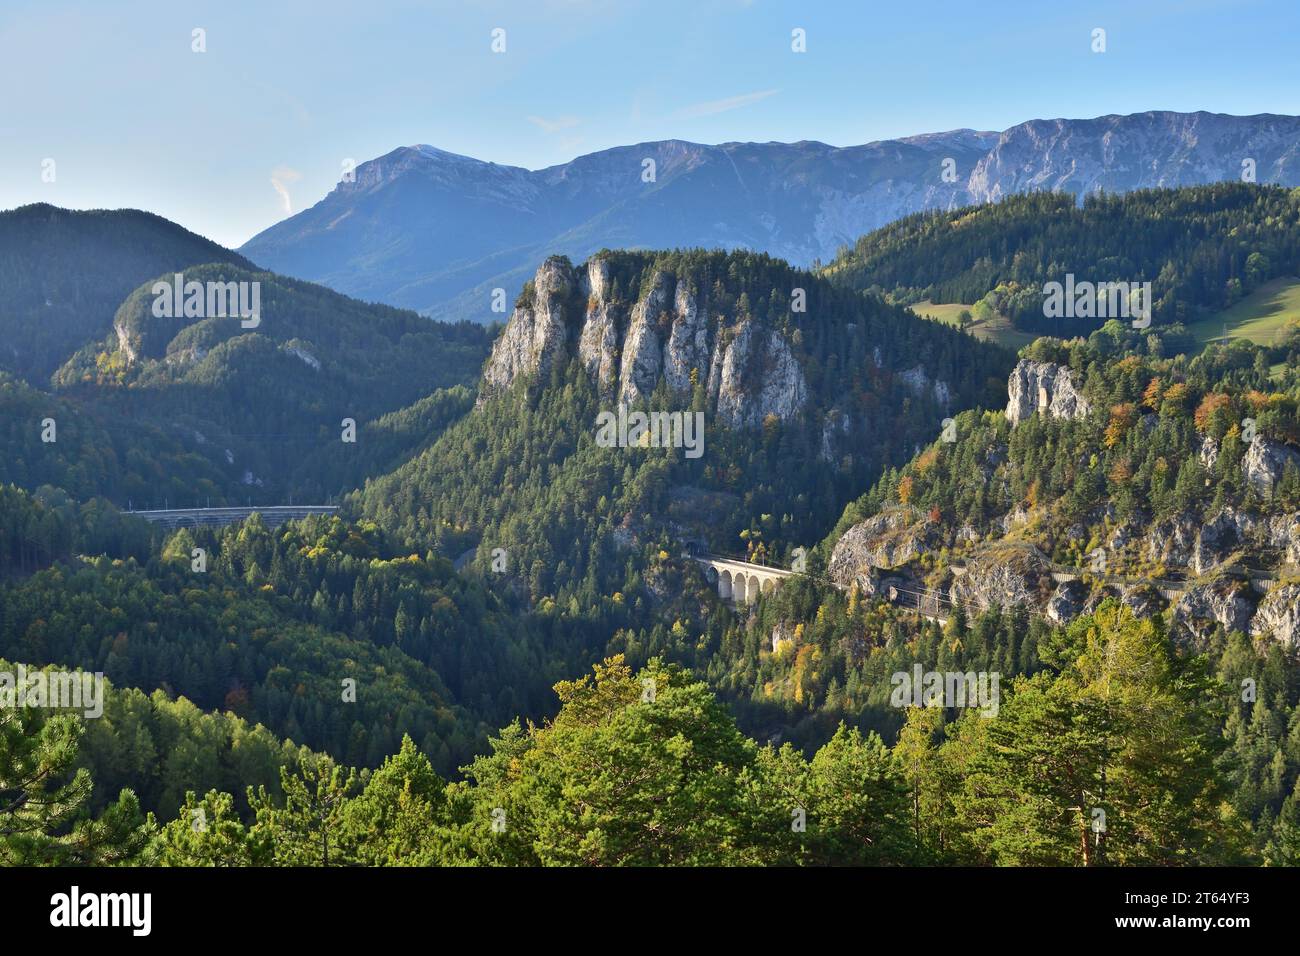 20 Schilling viewpoint near Semmering, Austria on an autumn day Stock Photo